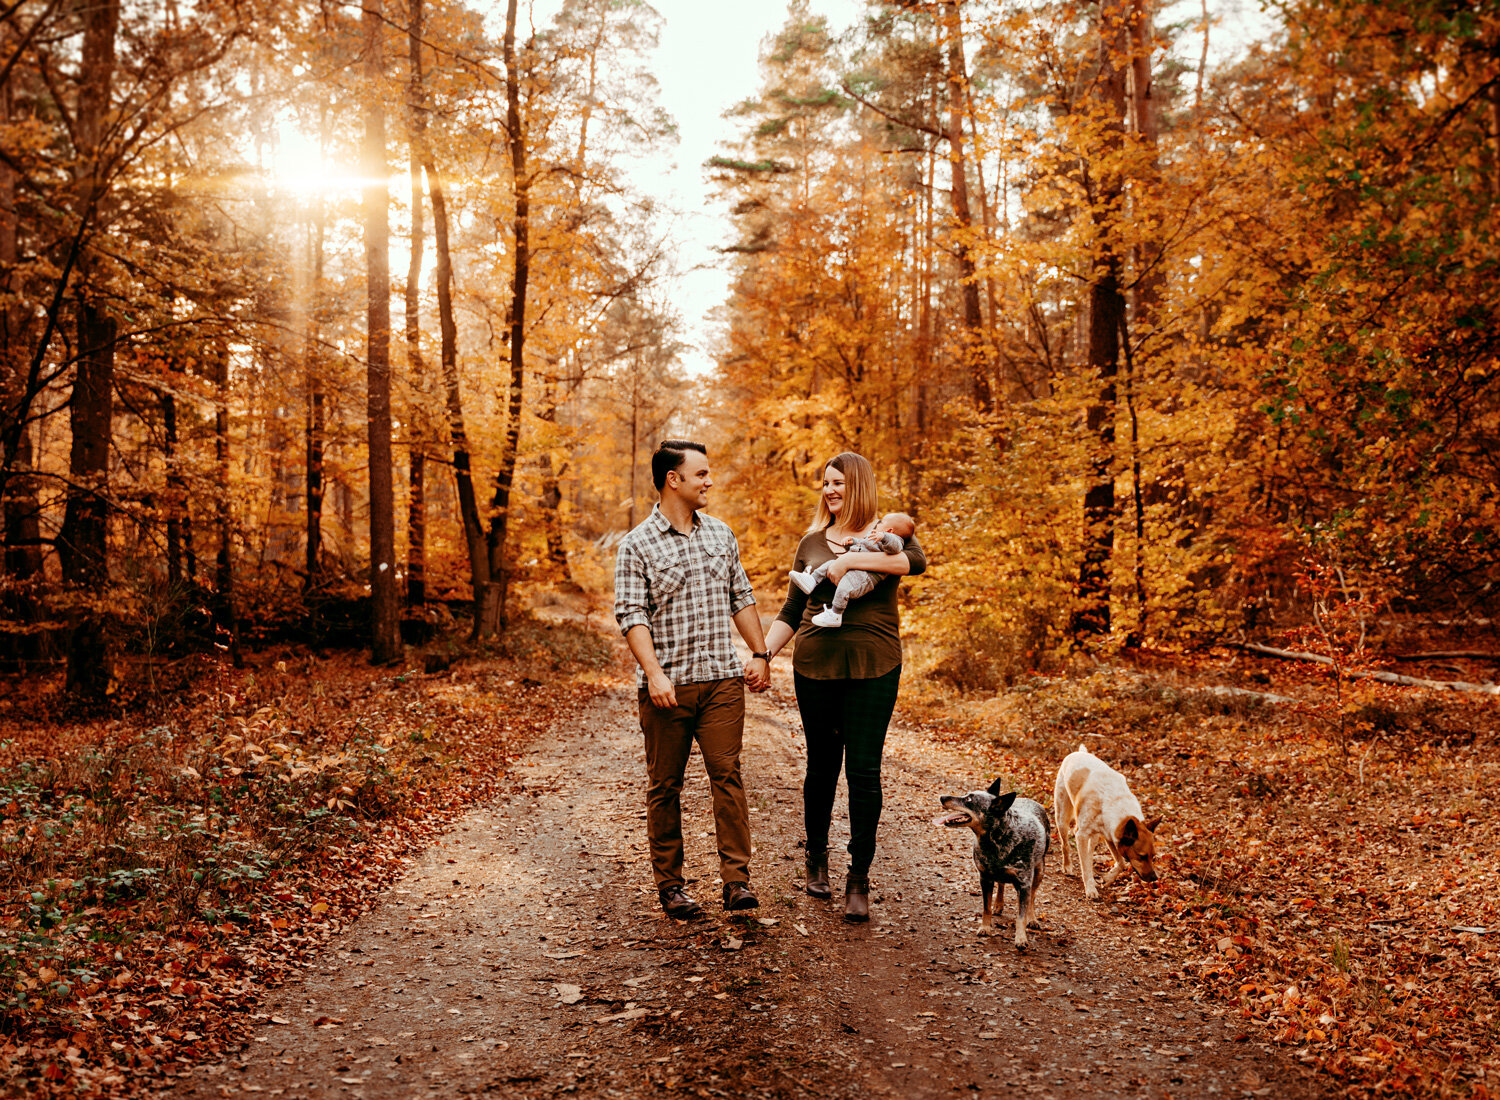 young-family-walking-in-fall-foliage-forest-by-pramstein-photographer-sarah-havens-kmc.jpg